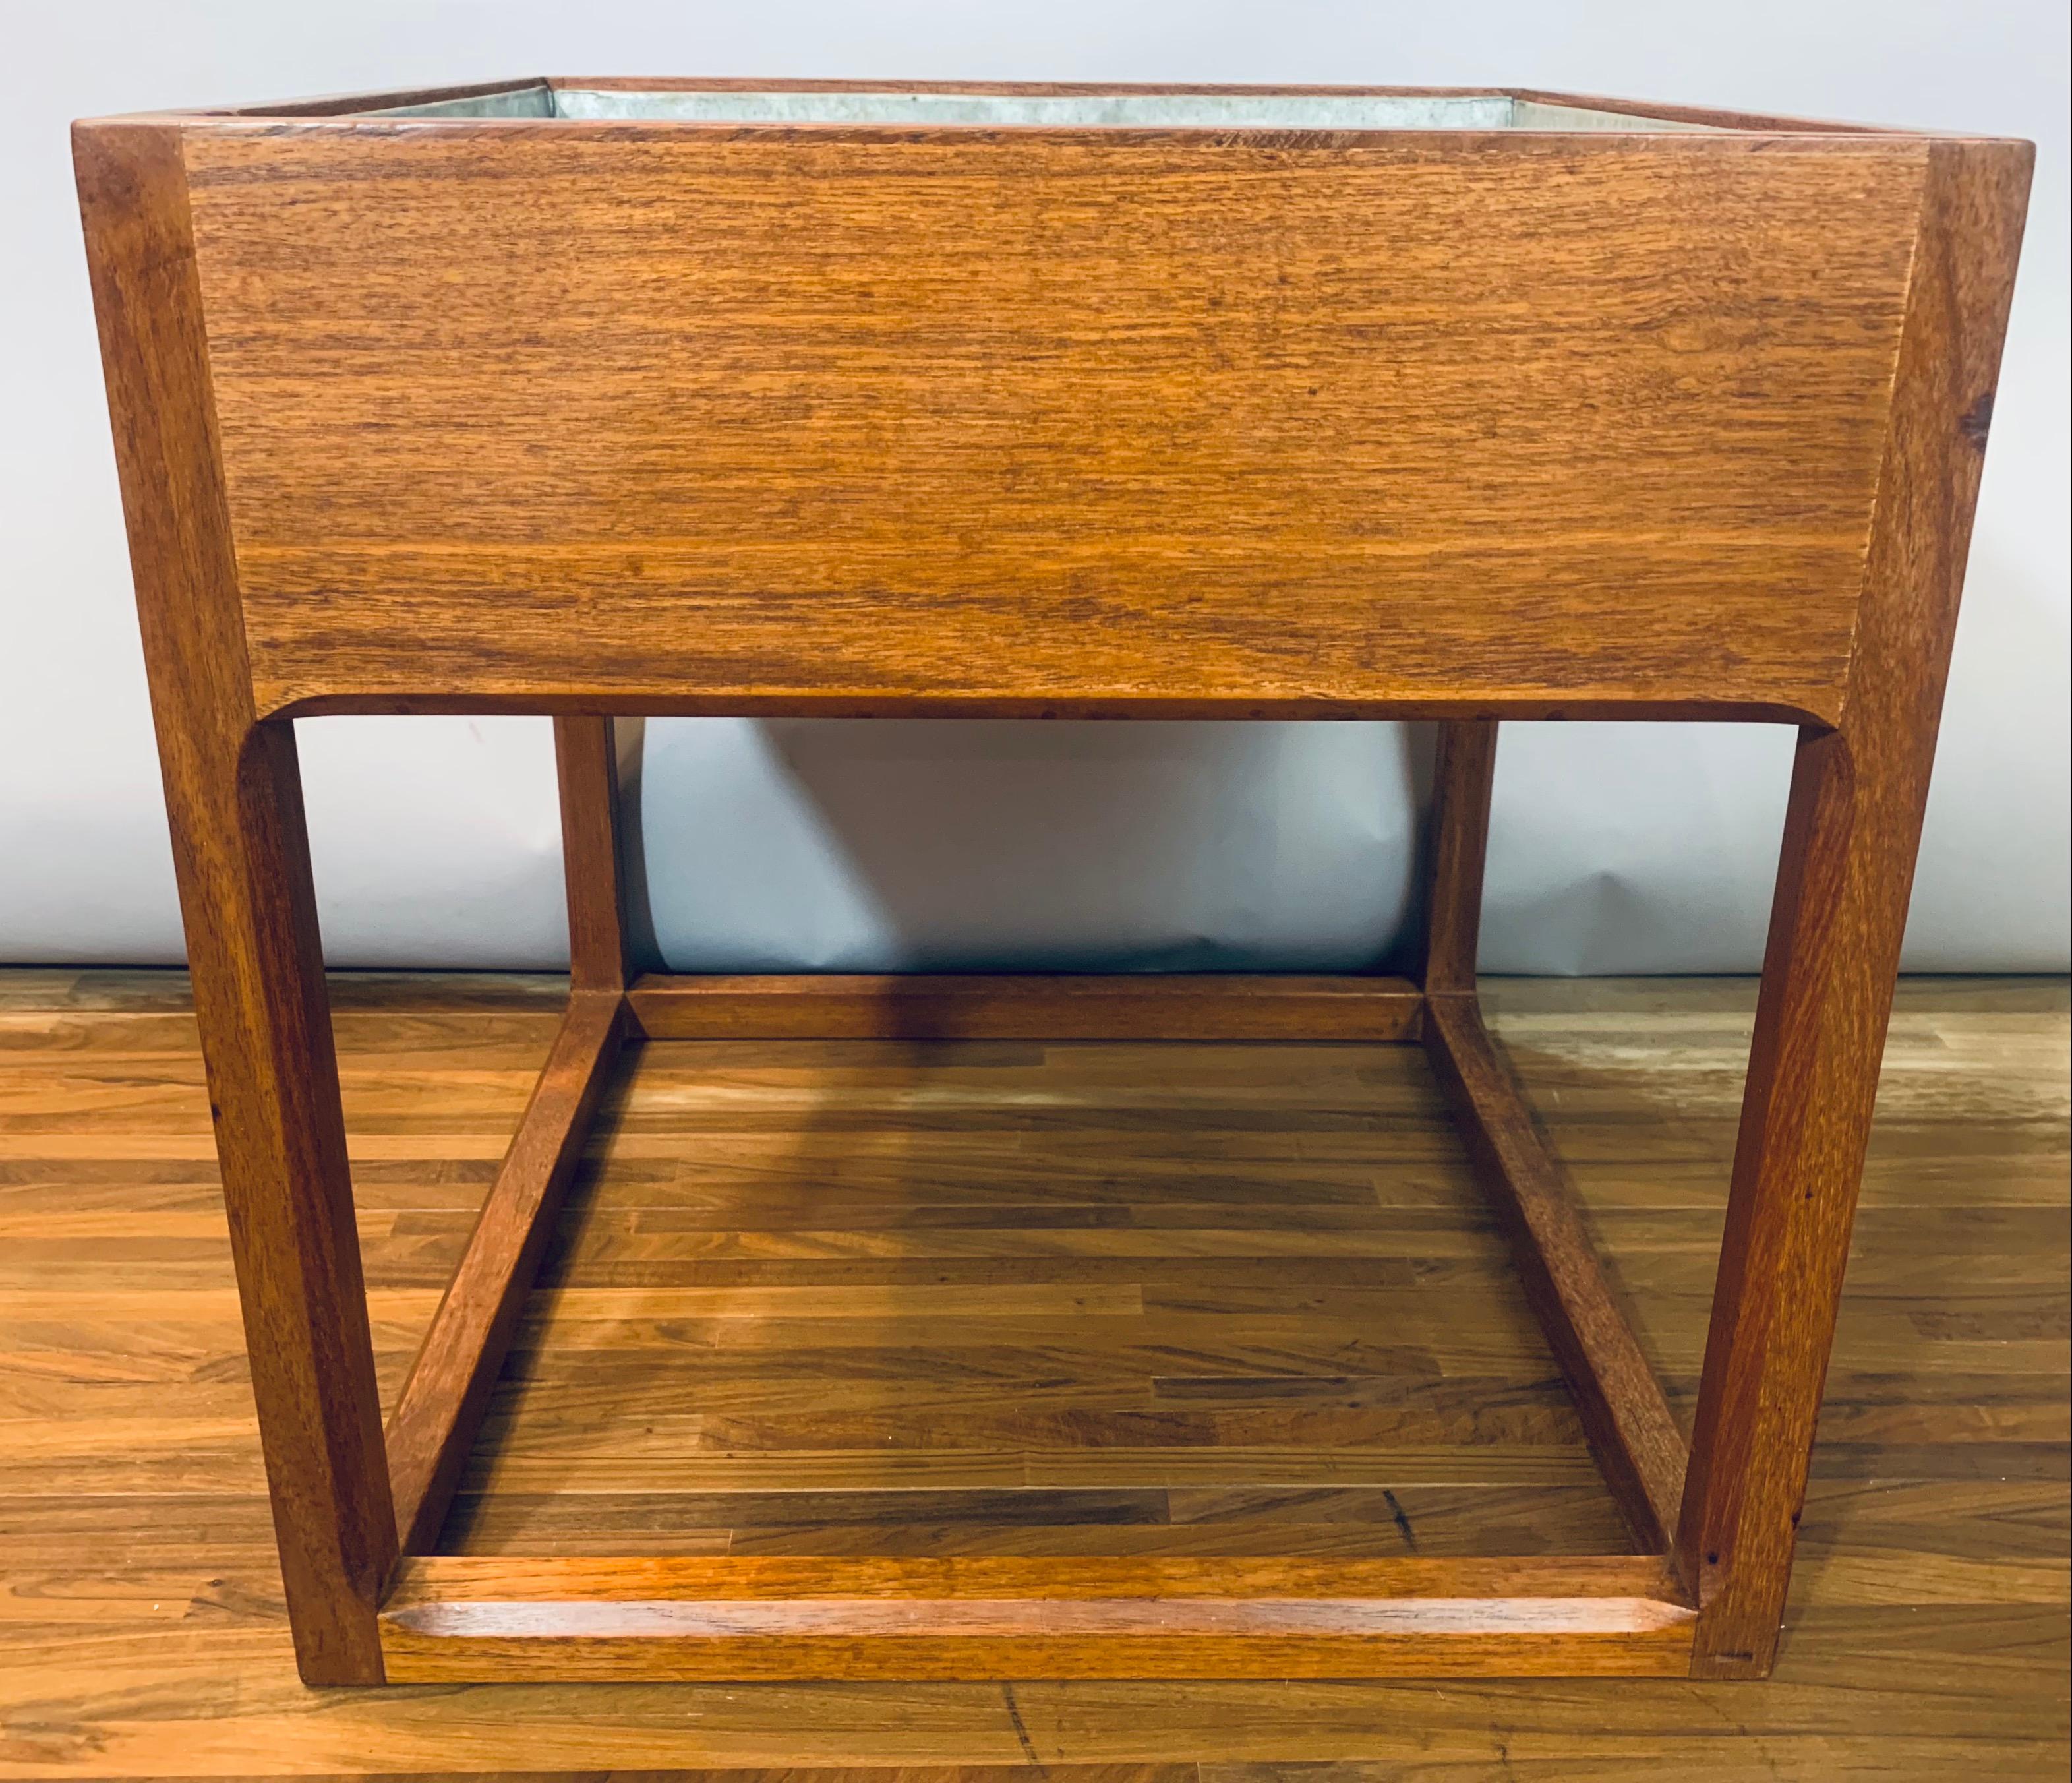 1960s Teak cubic planter with feature chamfered legs and supports. The removable metal liner is easily removed with two handles at either side. I have checked and It's watertight and is in good condition considering its age and use. The planter is